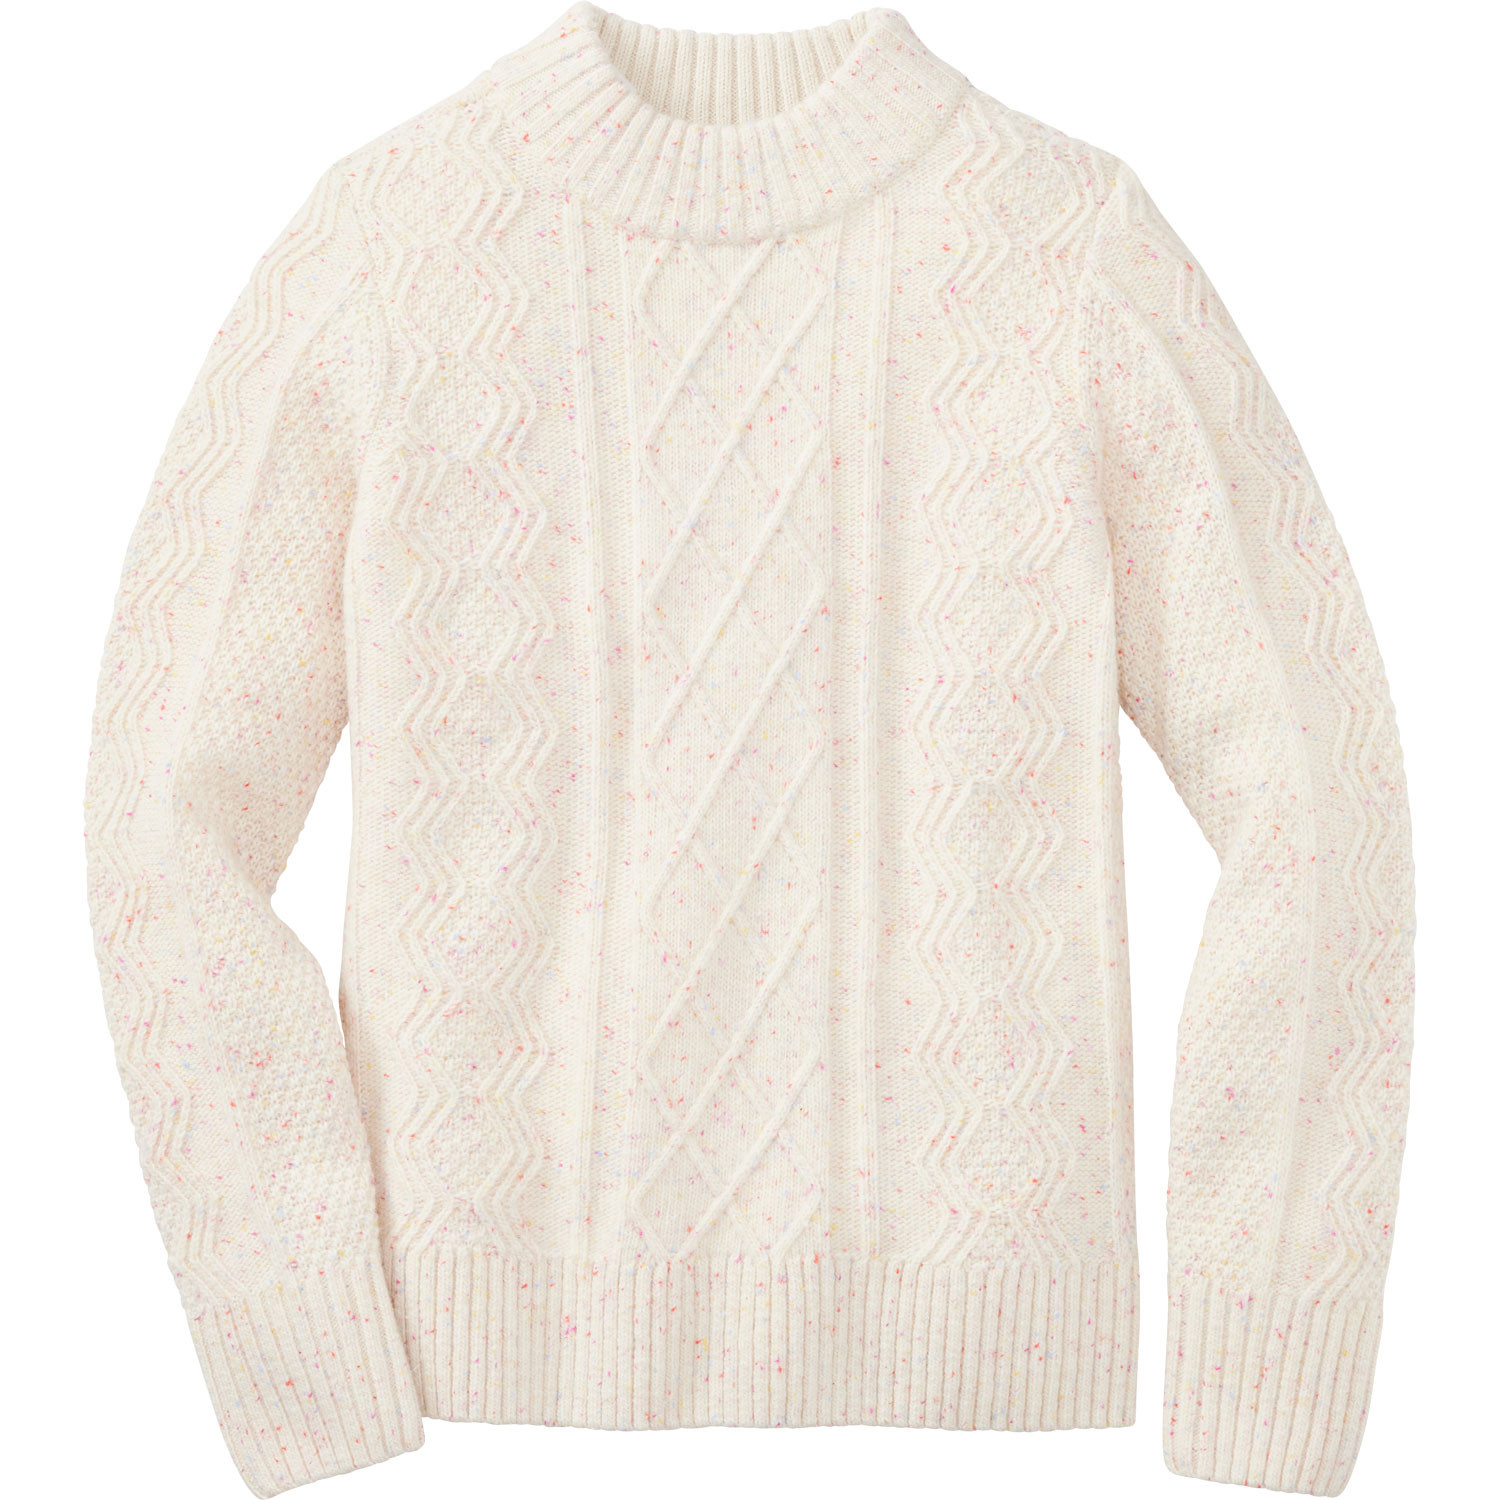 Women's Woolpaca Cable Sweater